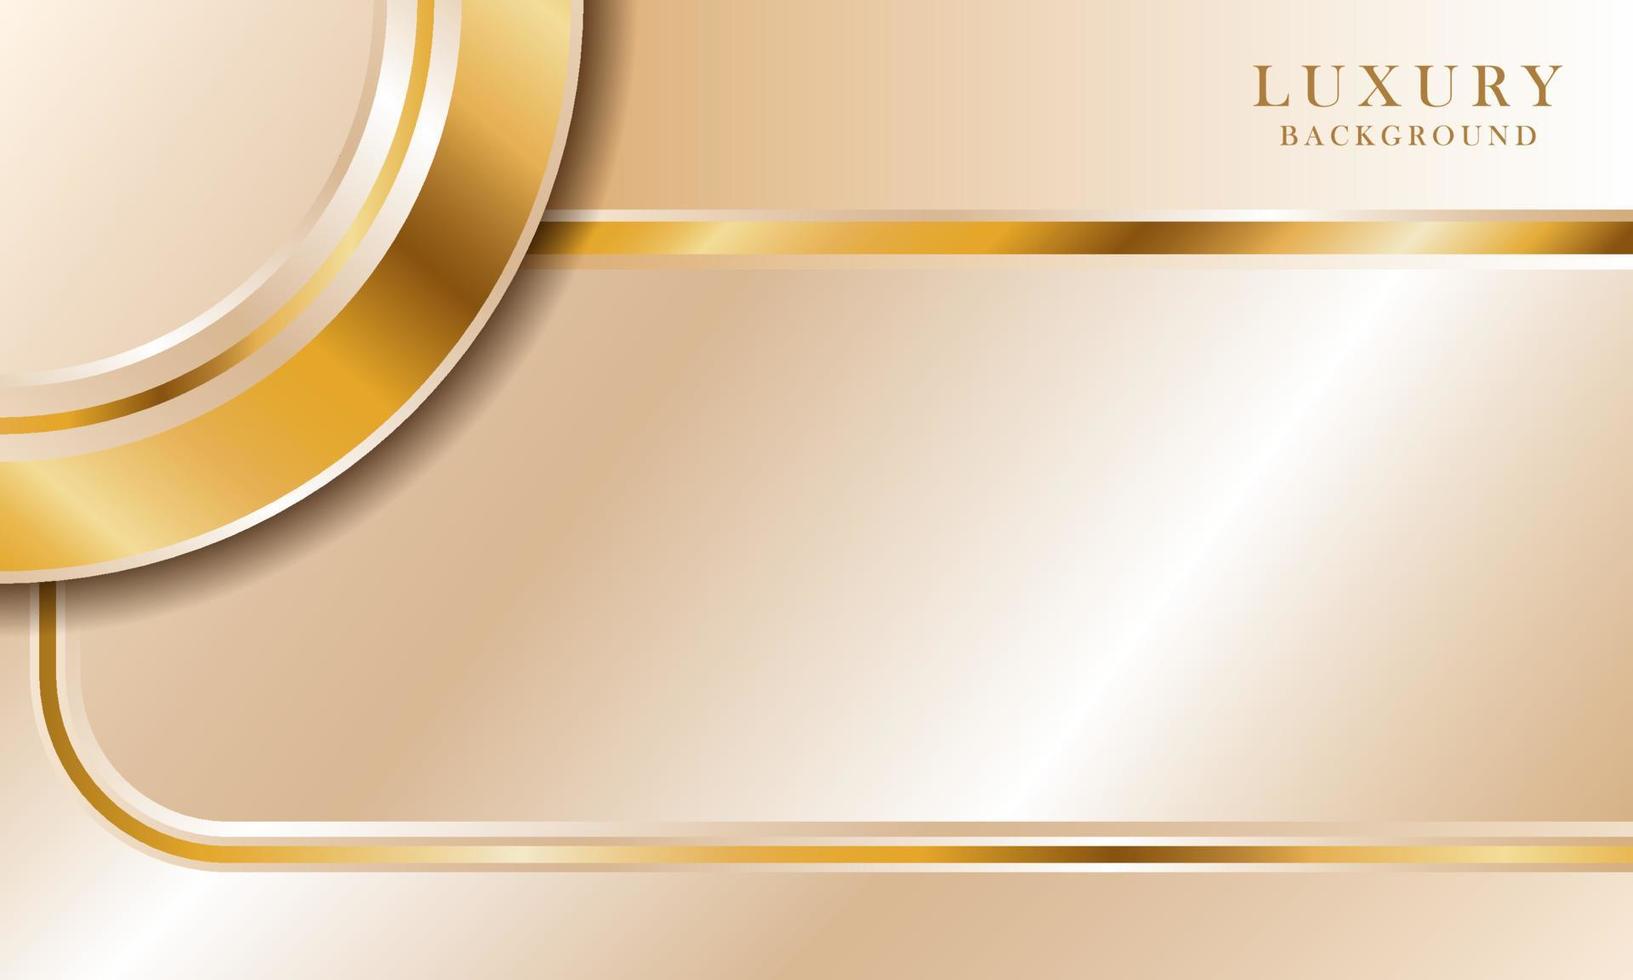 Luxurious light cream abstract background combined with gold line elements, modern template design vector illustration.